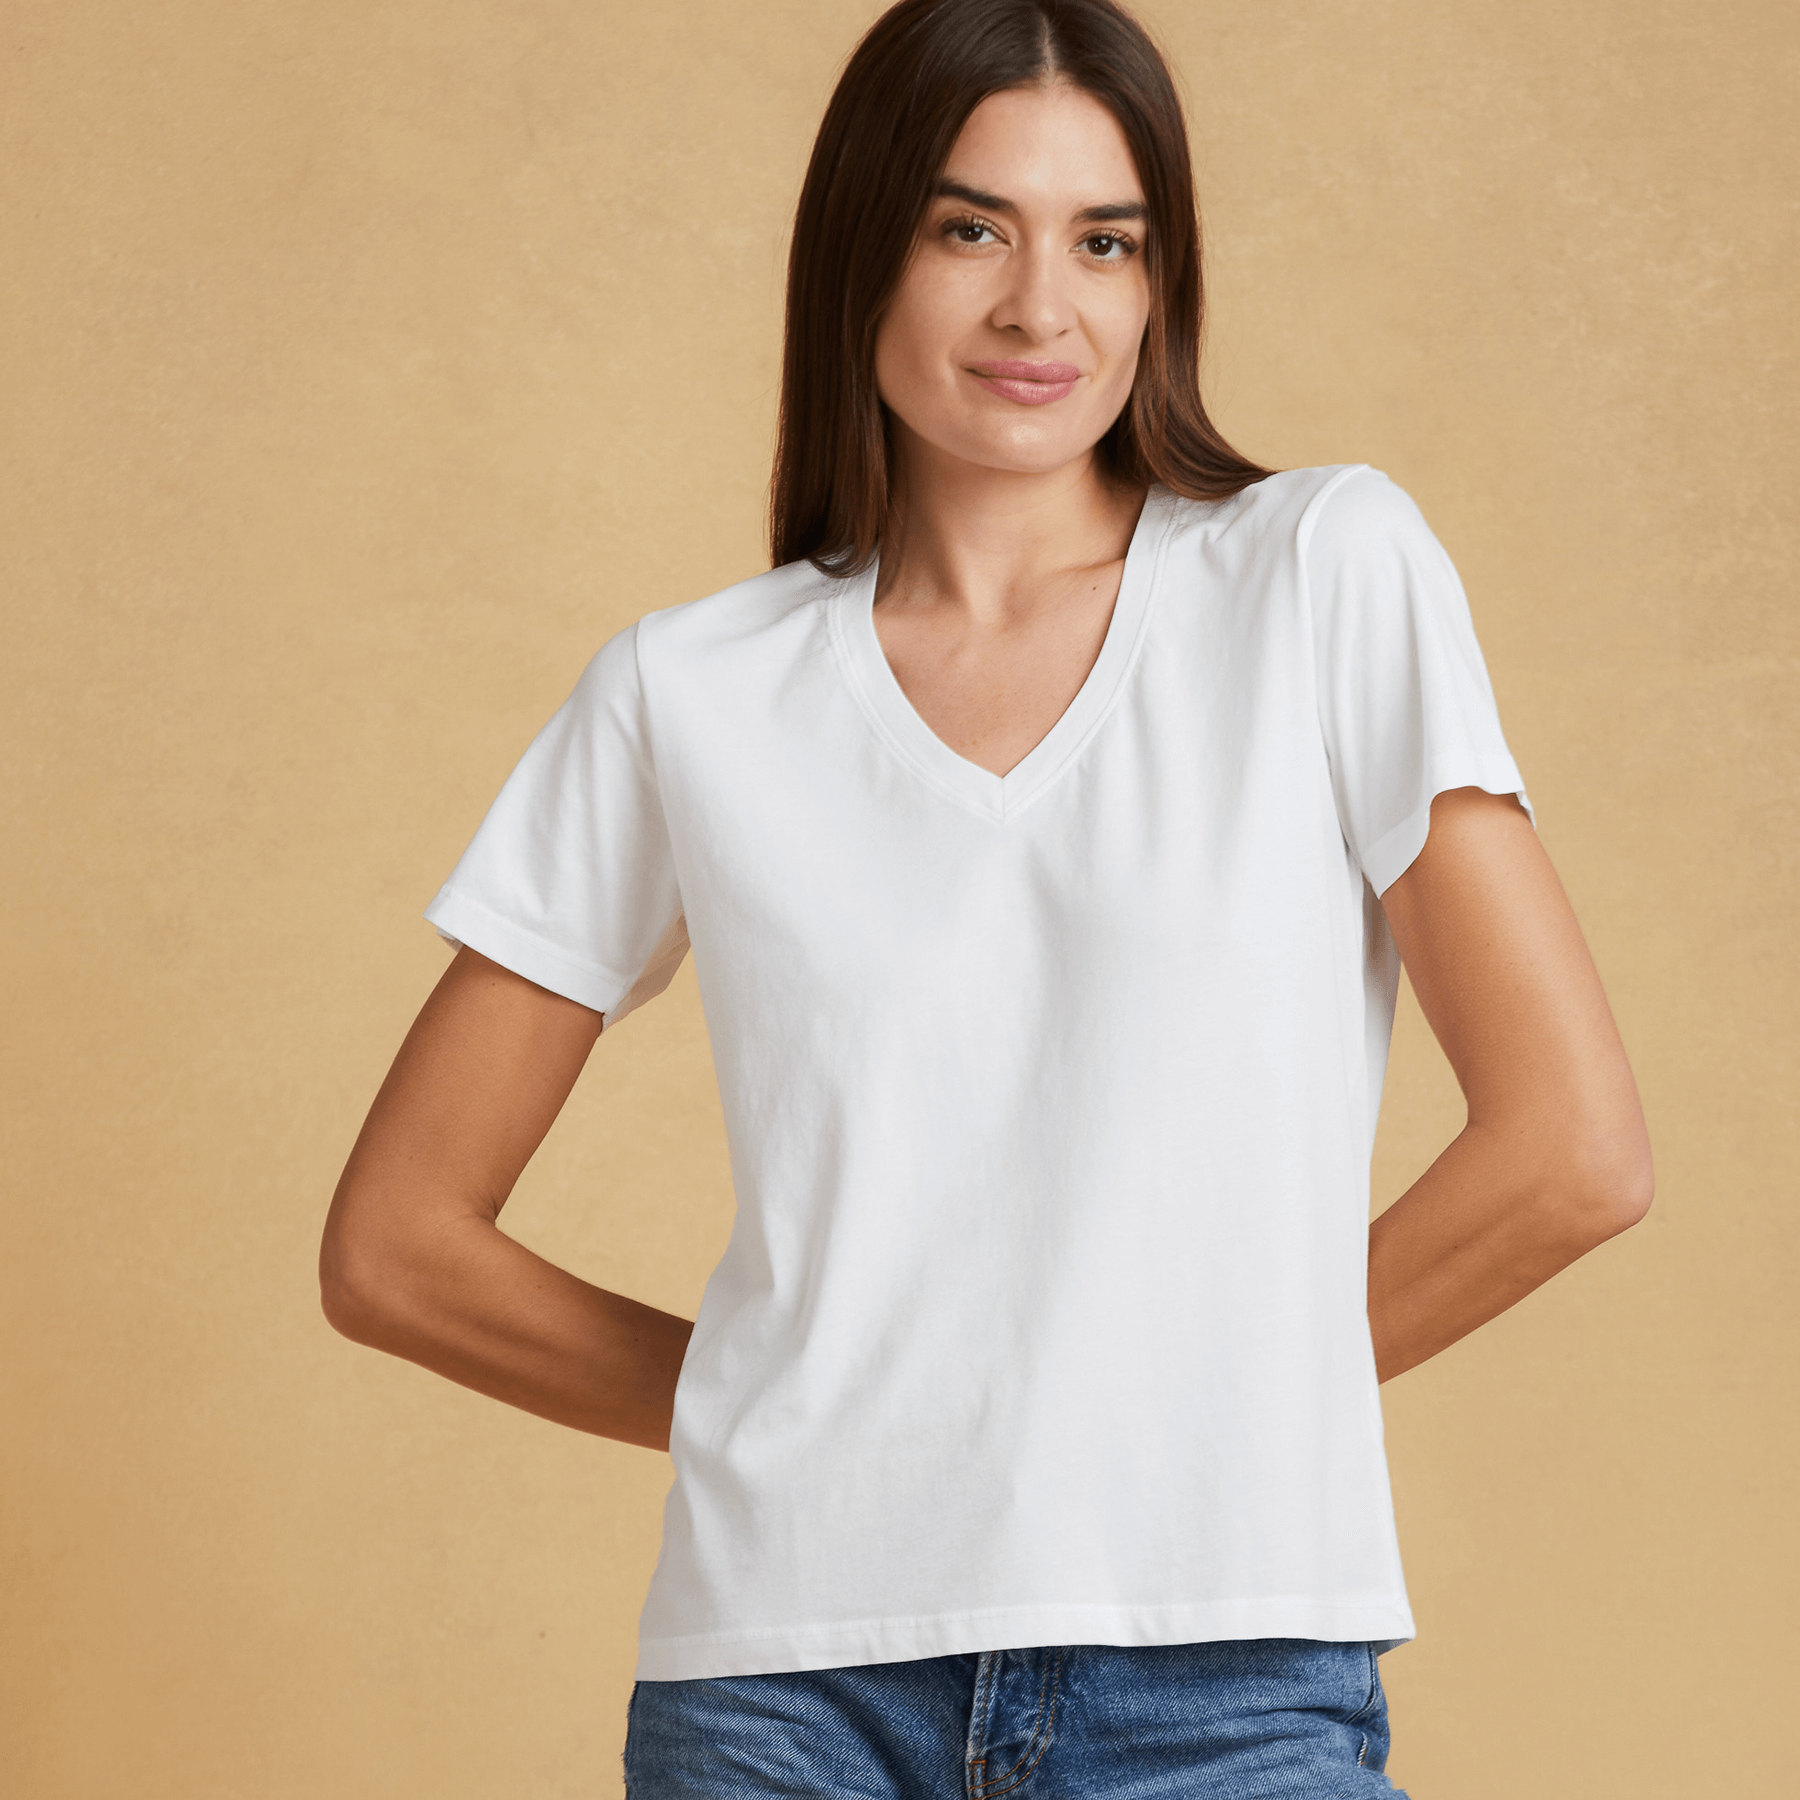 Work Blouses for Women Womens Tops 3/4 Sleeve Solid Plain Travel Cute Tops  V Neck Slim Fit Half Sleeve Tshirts